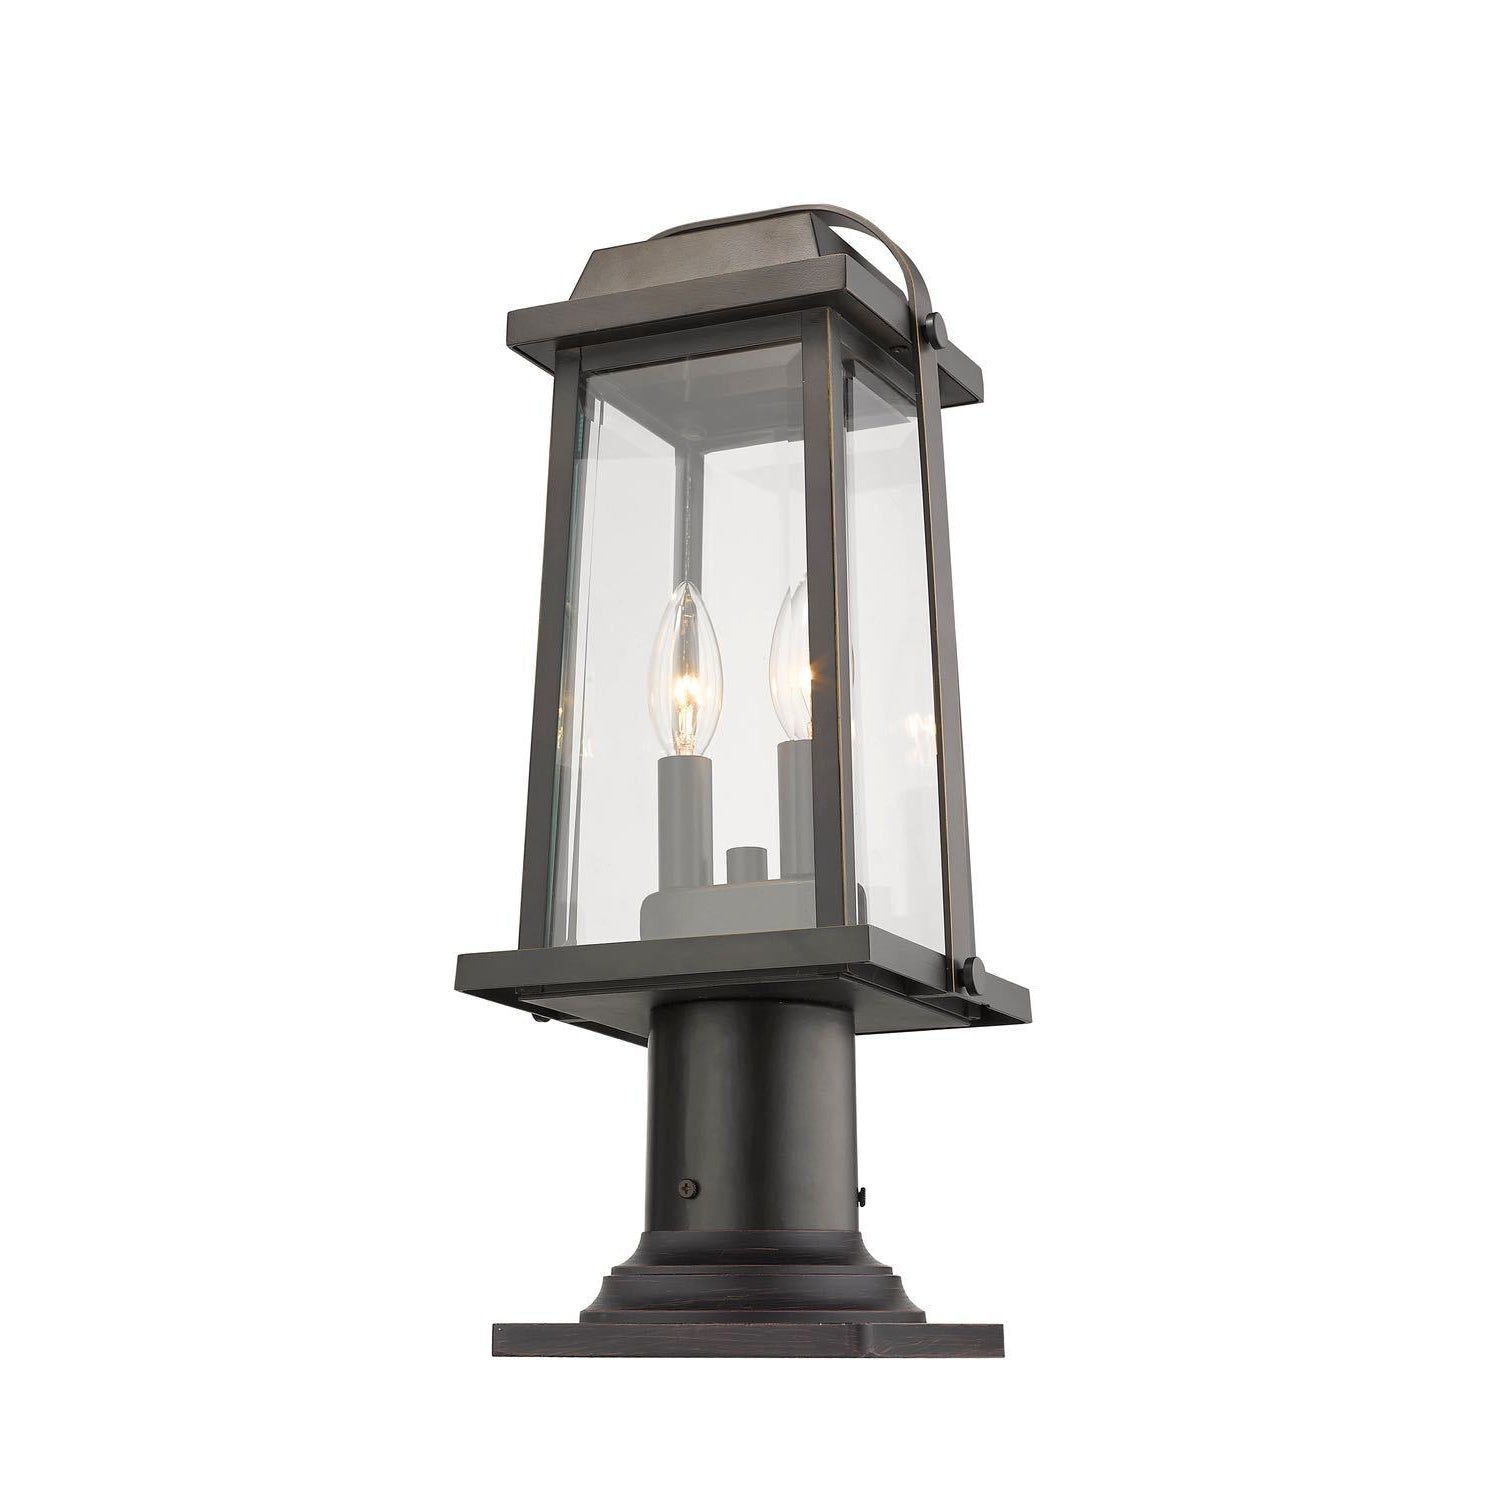 Millworks Pier Mount Oil Rubbed Bronze